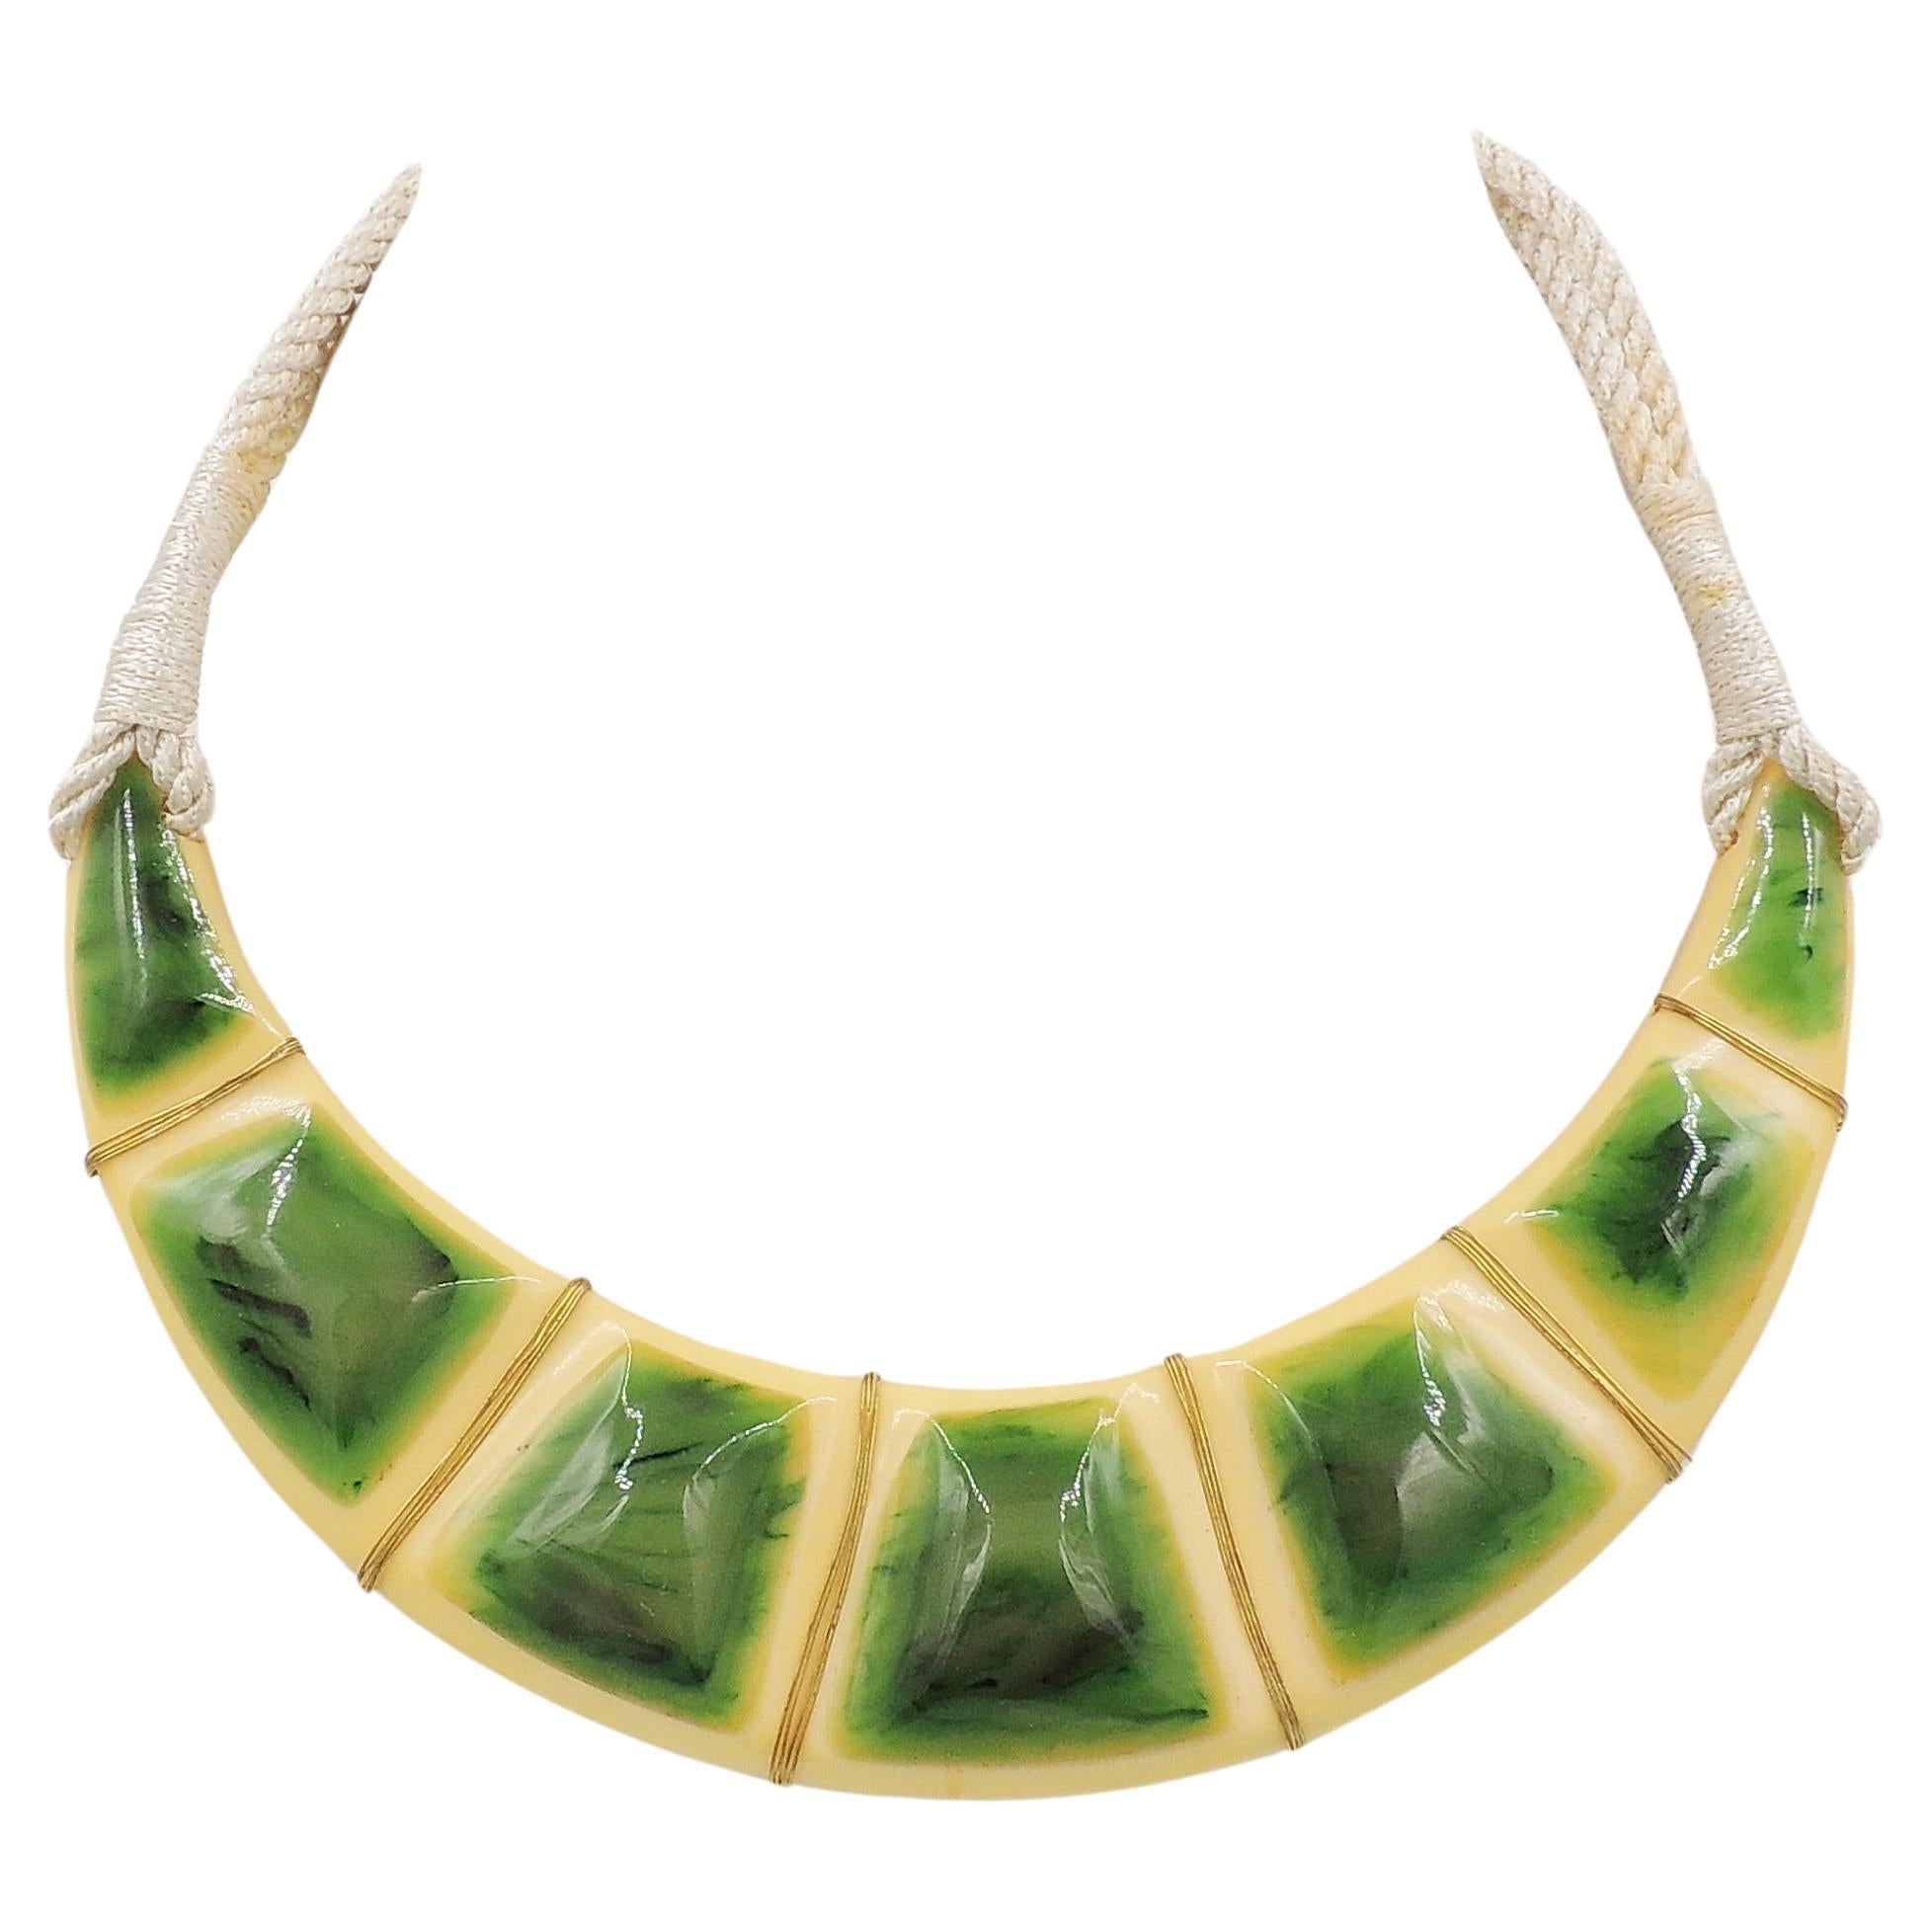 Vintage 1970s Signed Valentino Wrapped Green & Ivory Lucite Collar Necklace For Sale